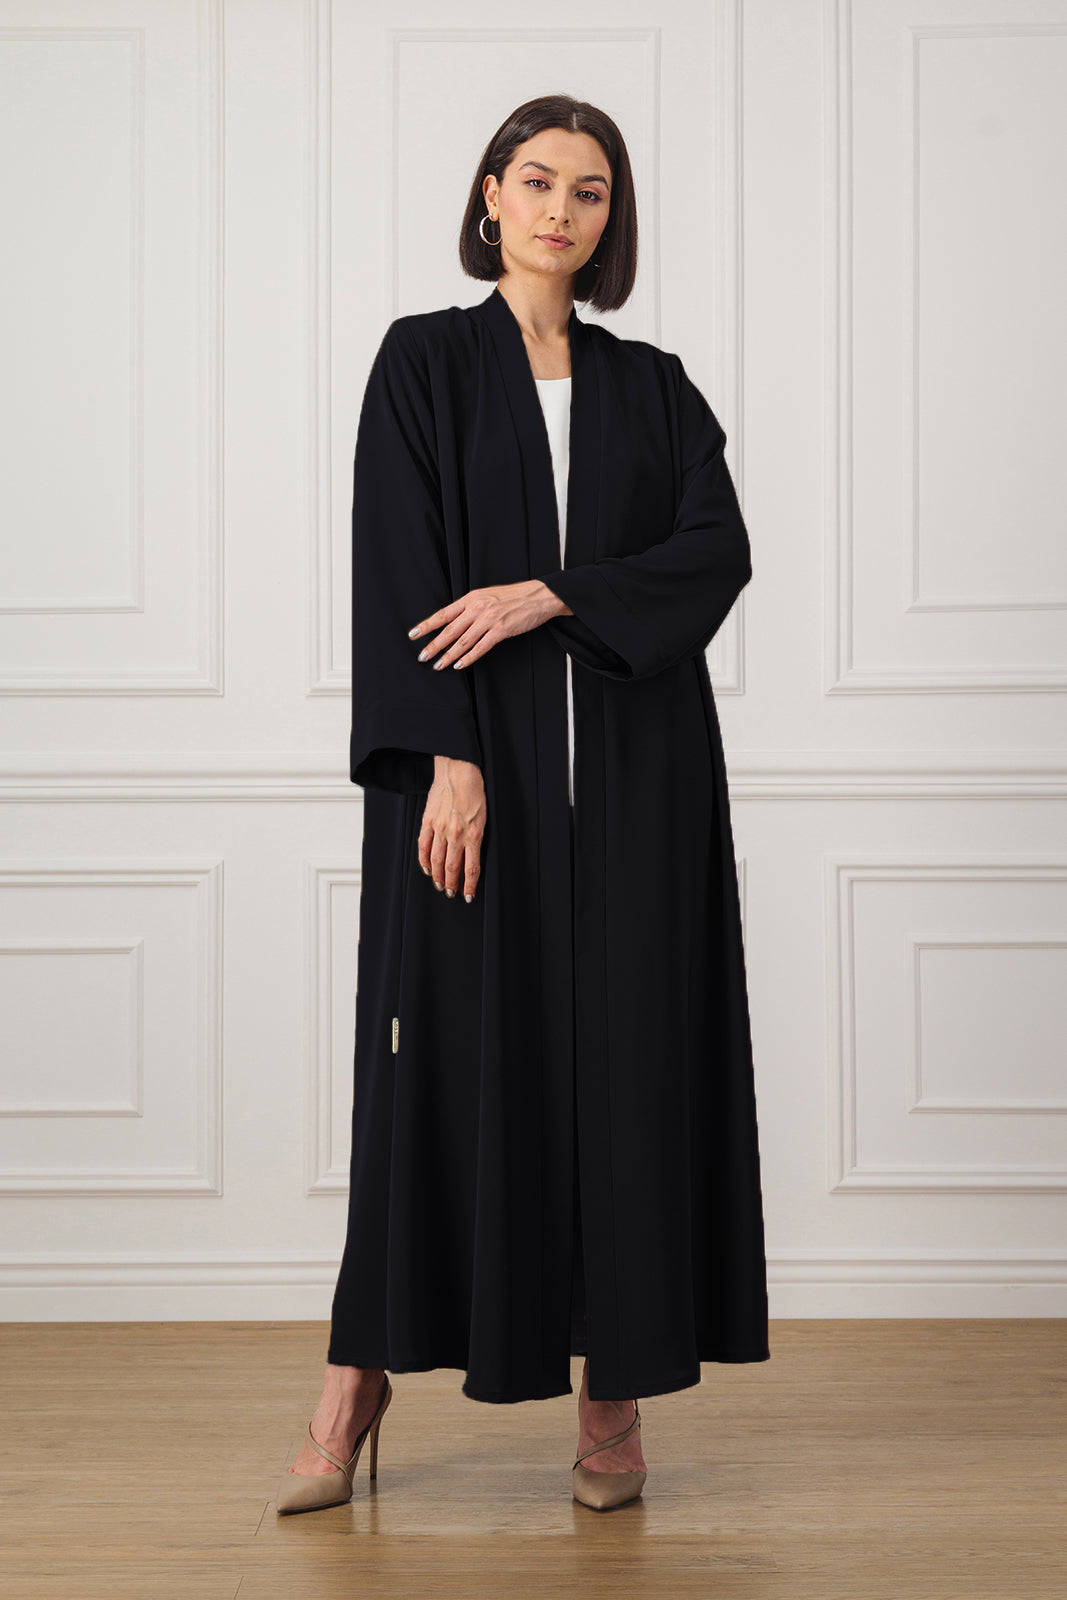 Classic Abaya designed with overlapped detail